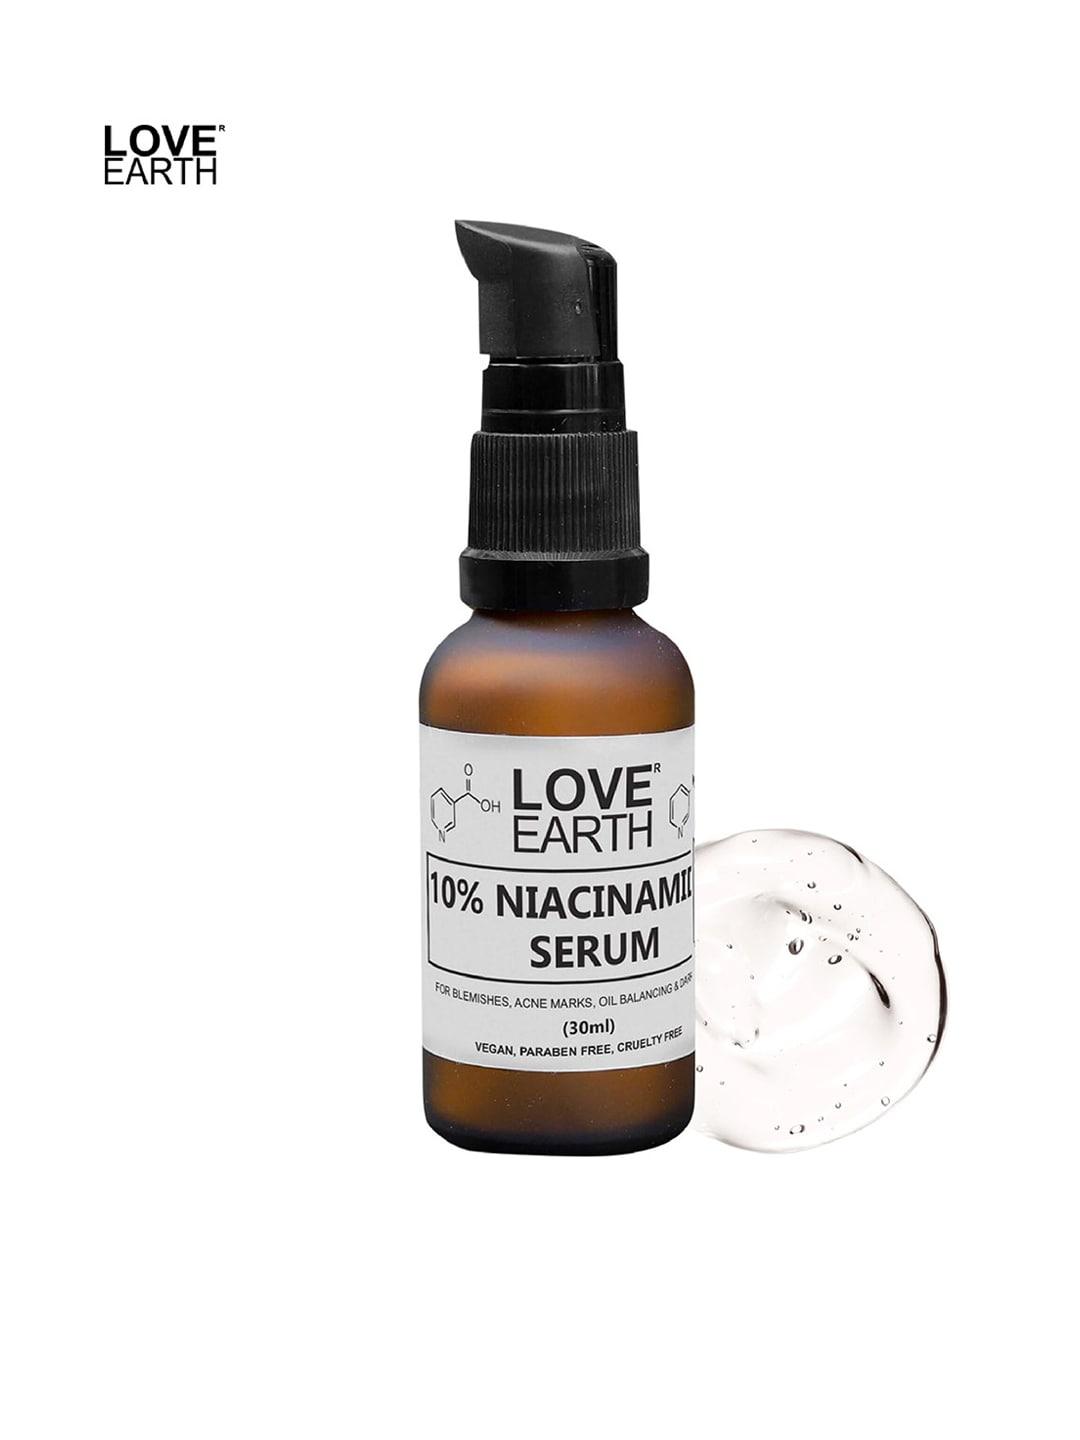 LOVE EARTH 10% Niacinamide Serum for Acne Spots & Blemishes - 30ml